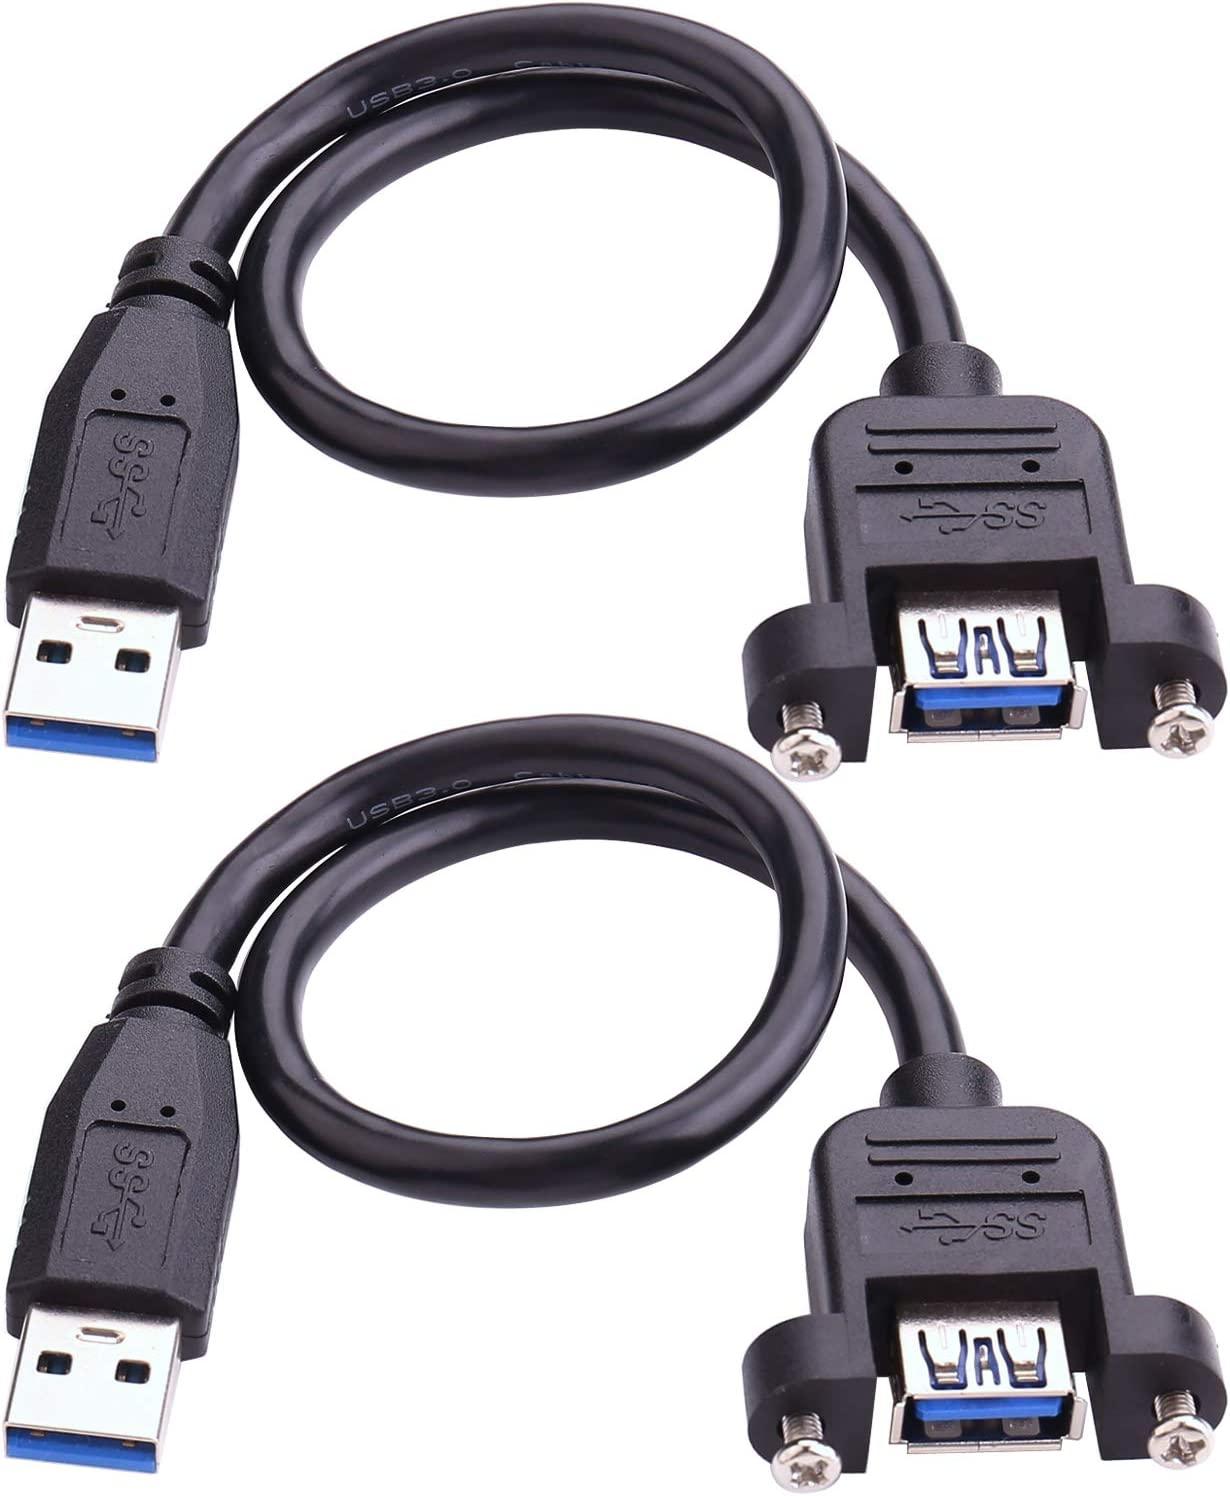 USB A Extension Cable.jpg